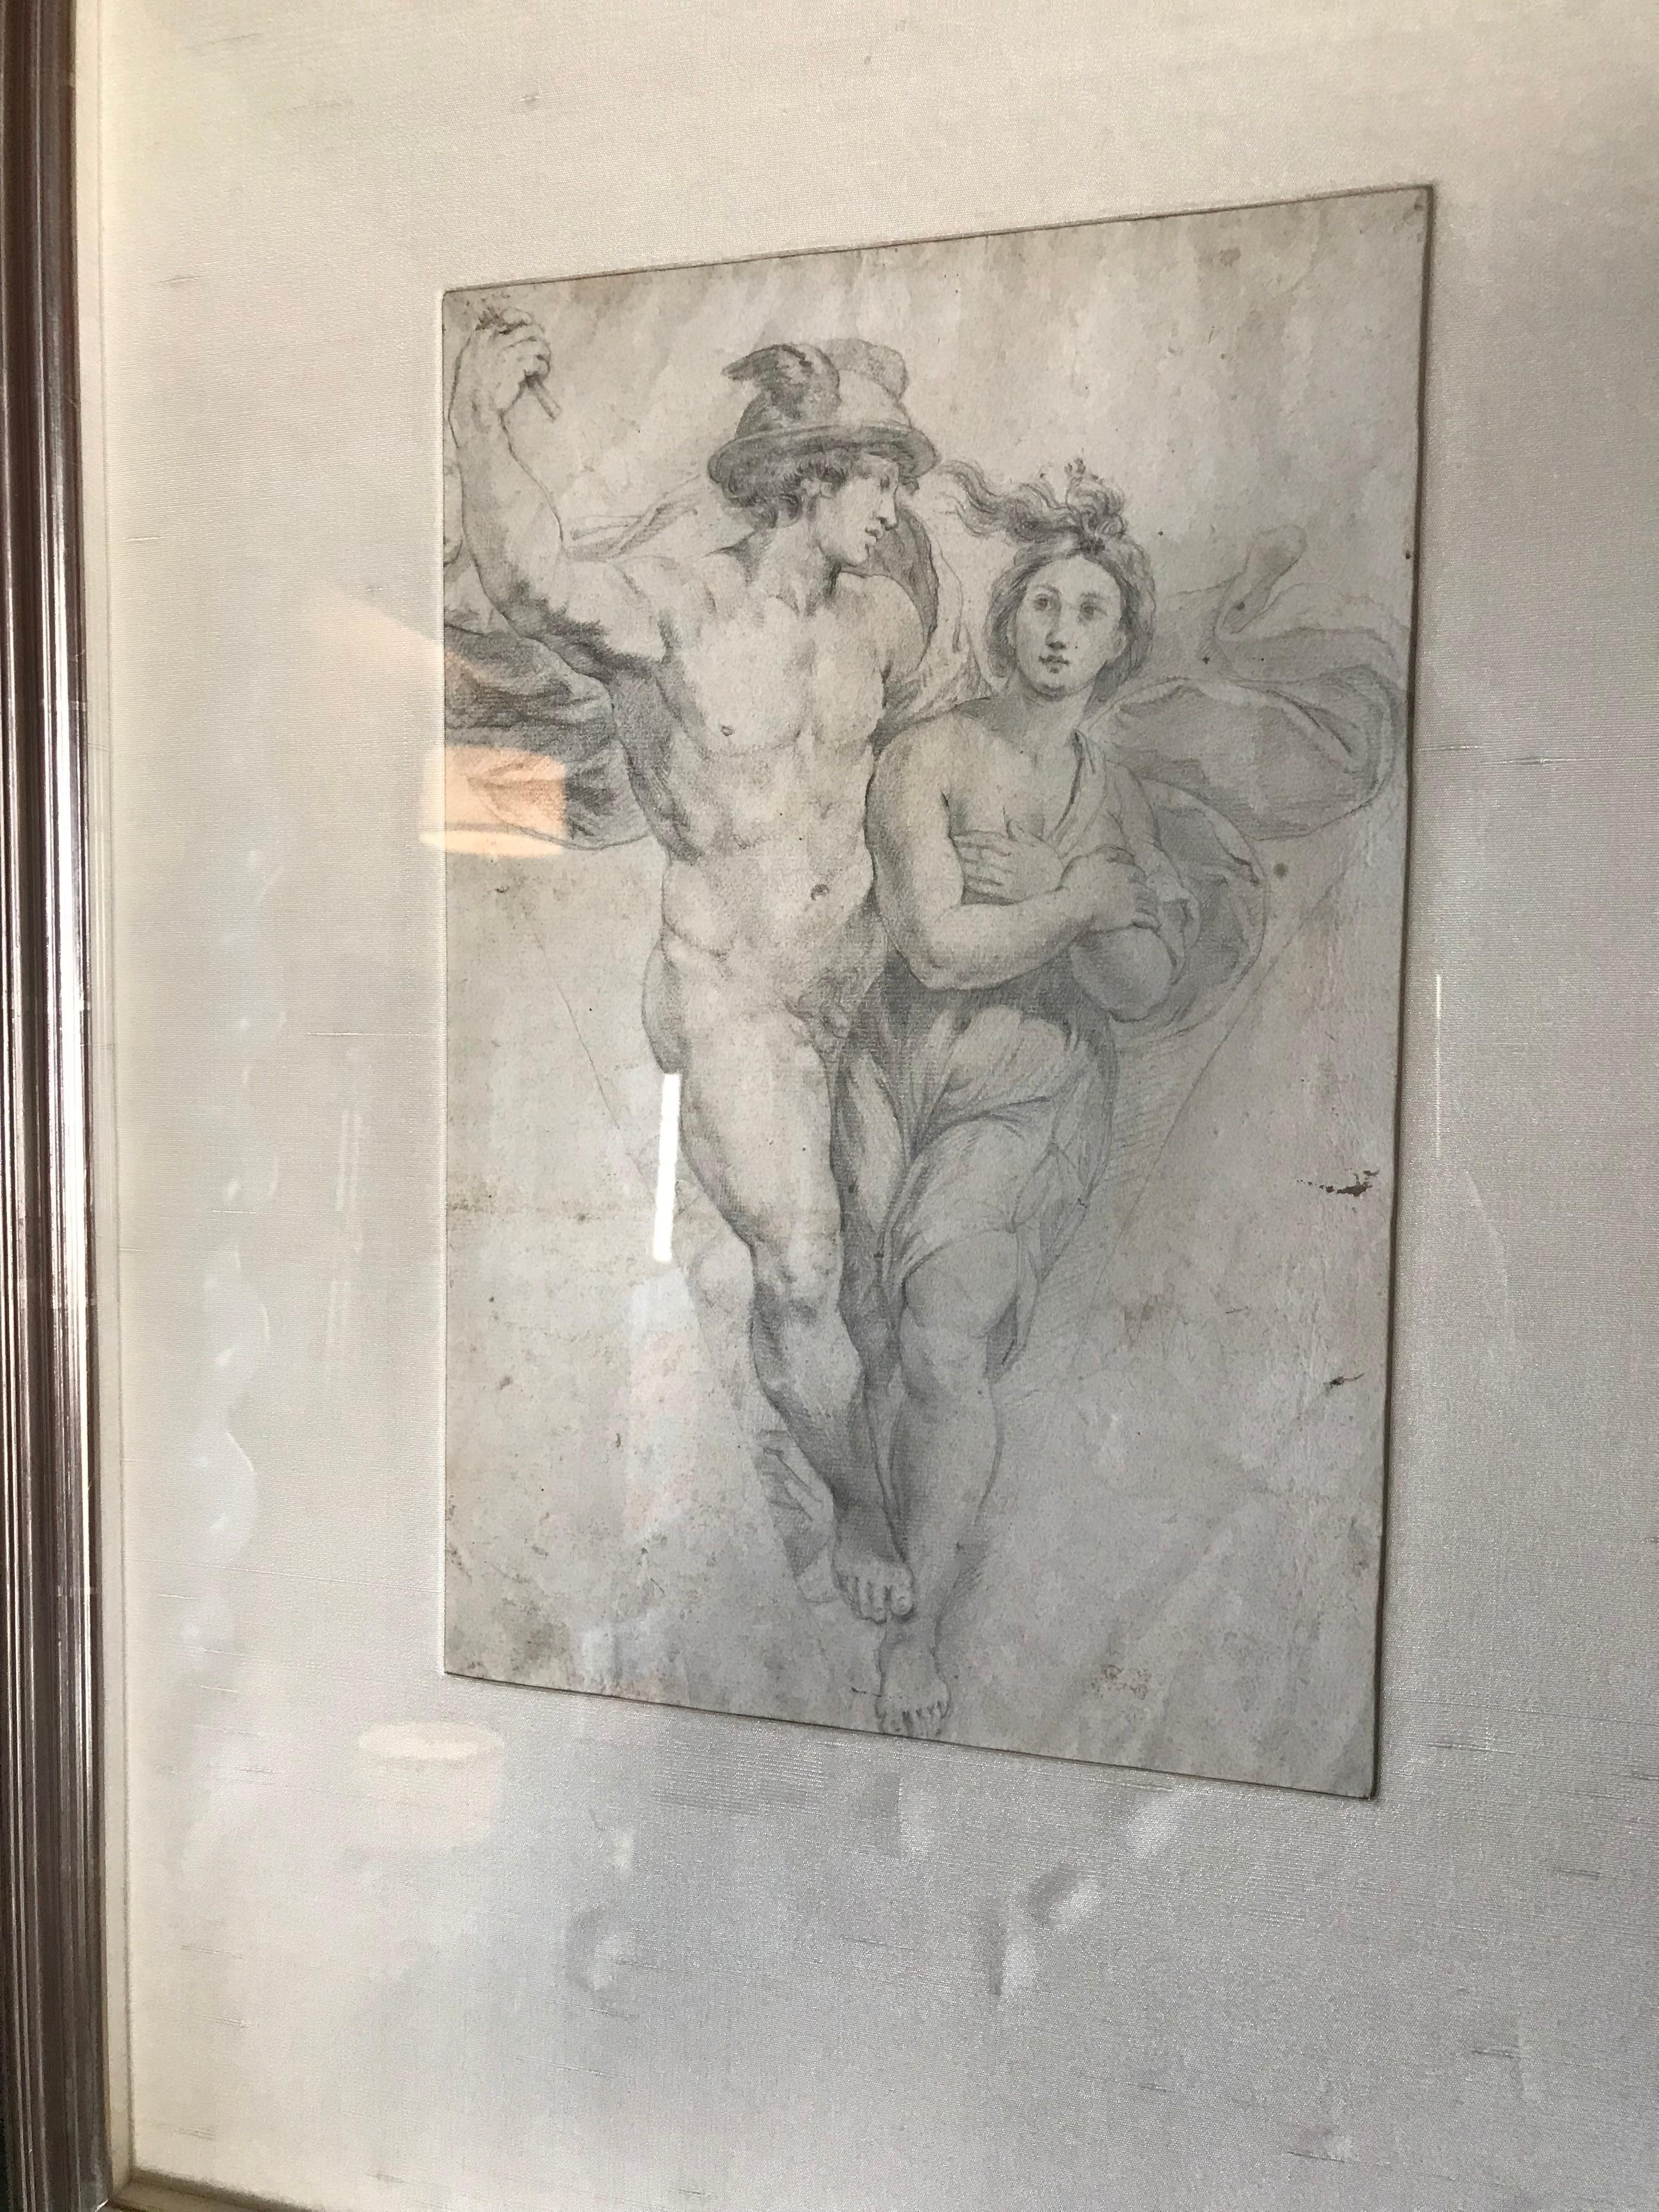 Refined 18th-century charcoal drawing of Apollo and Daphne on linen mat in continuous corner hand carved pewter-leaf frame. Slight water damage to linen mat at the bottom (shown in photos), but can be re-matted in same linen upon purchase, circa